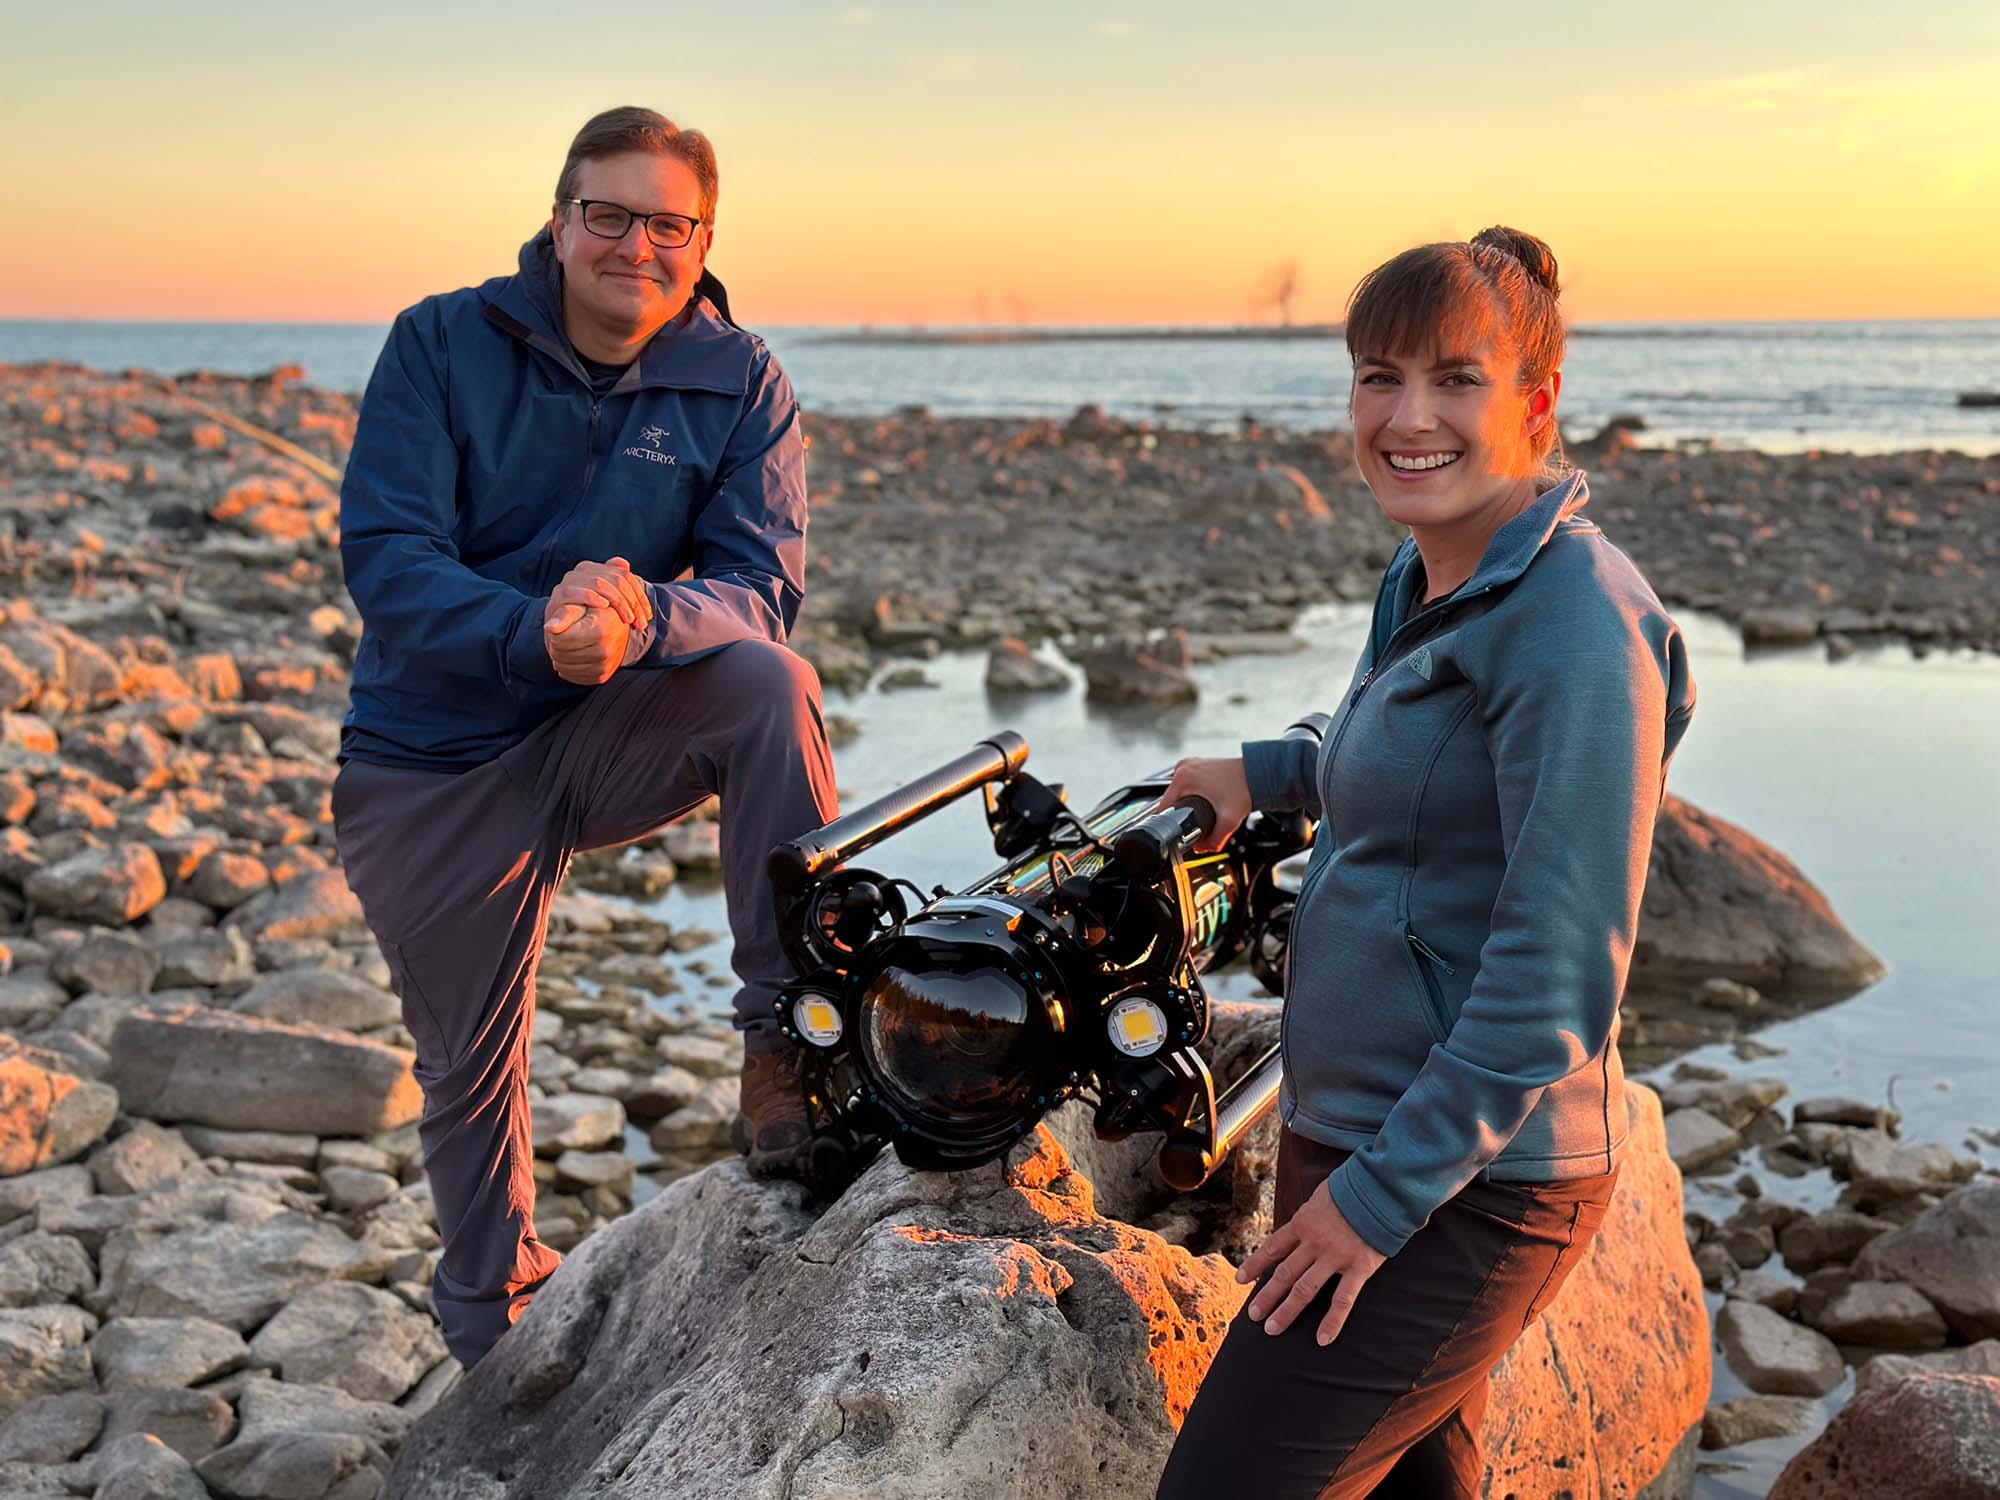 "All Too Clear" Co-directors with their ROV Boxfish Luna. Photo Credit: Inspired Planet Productions